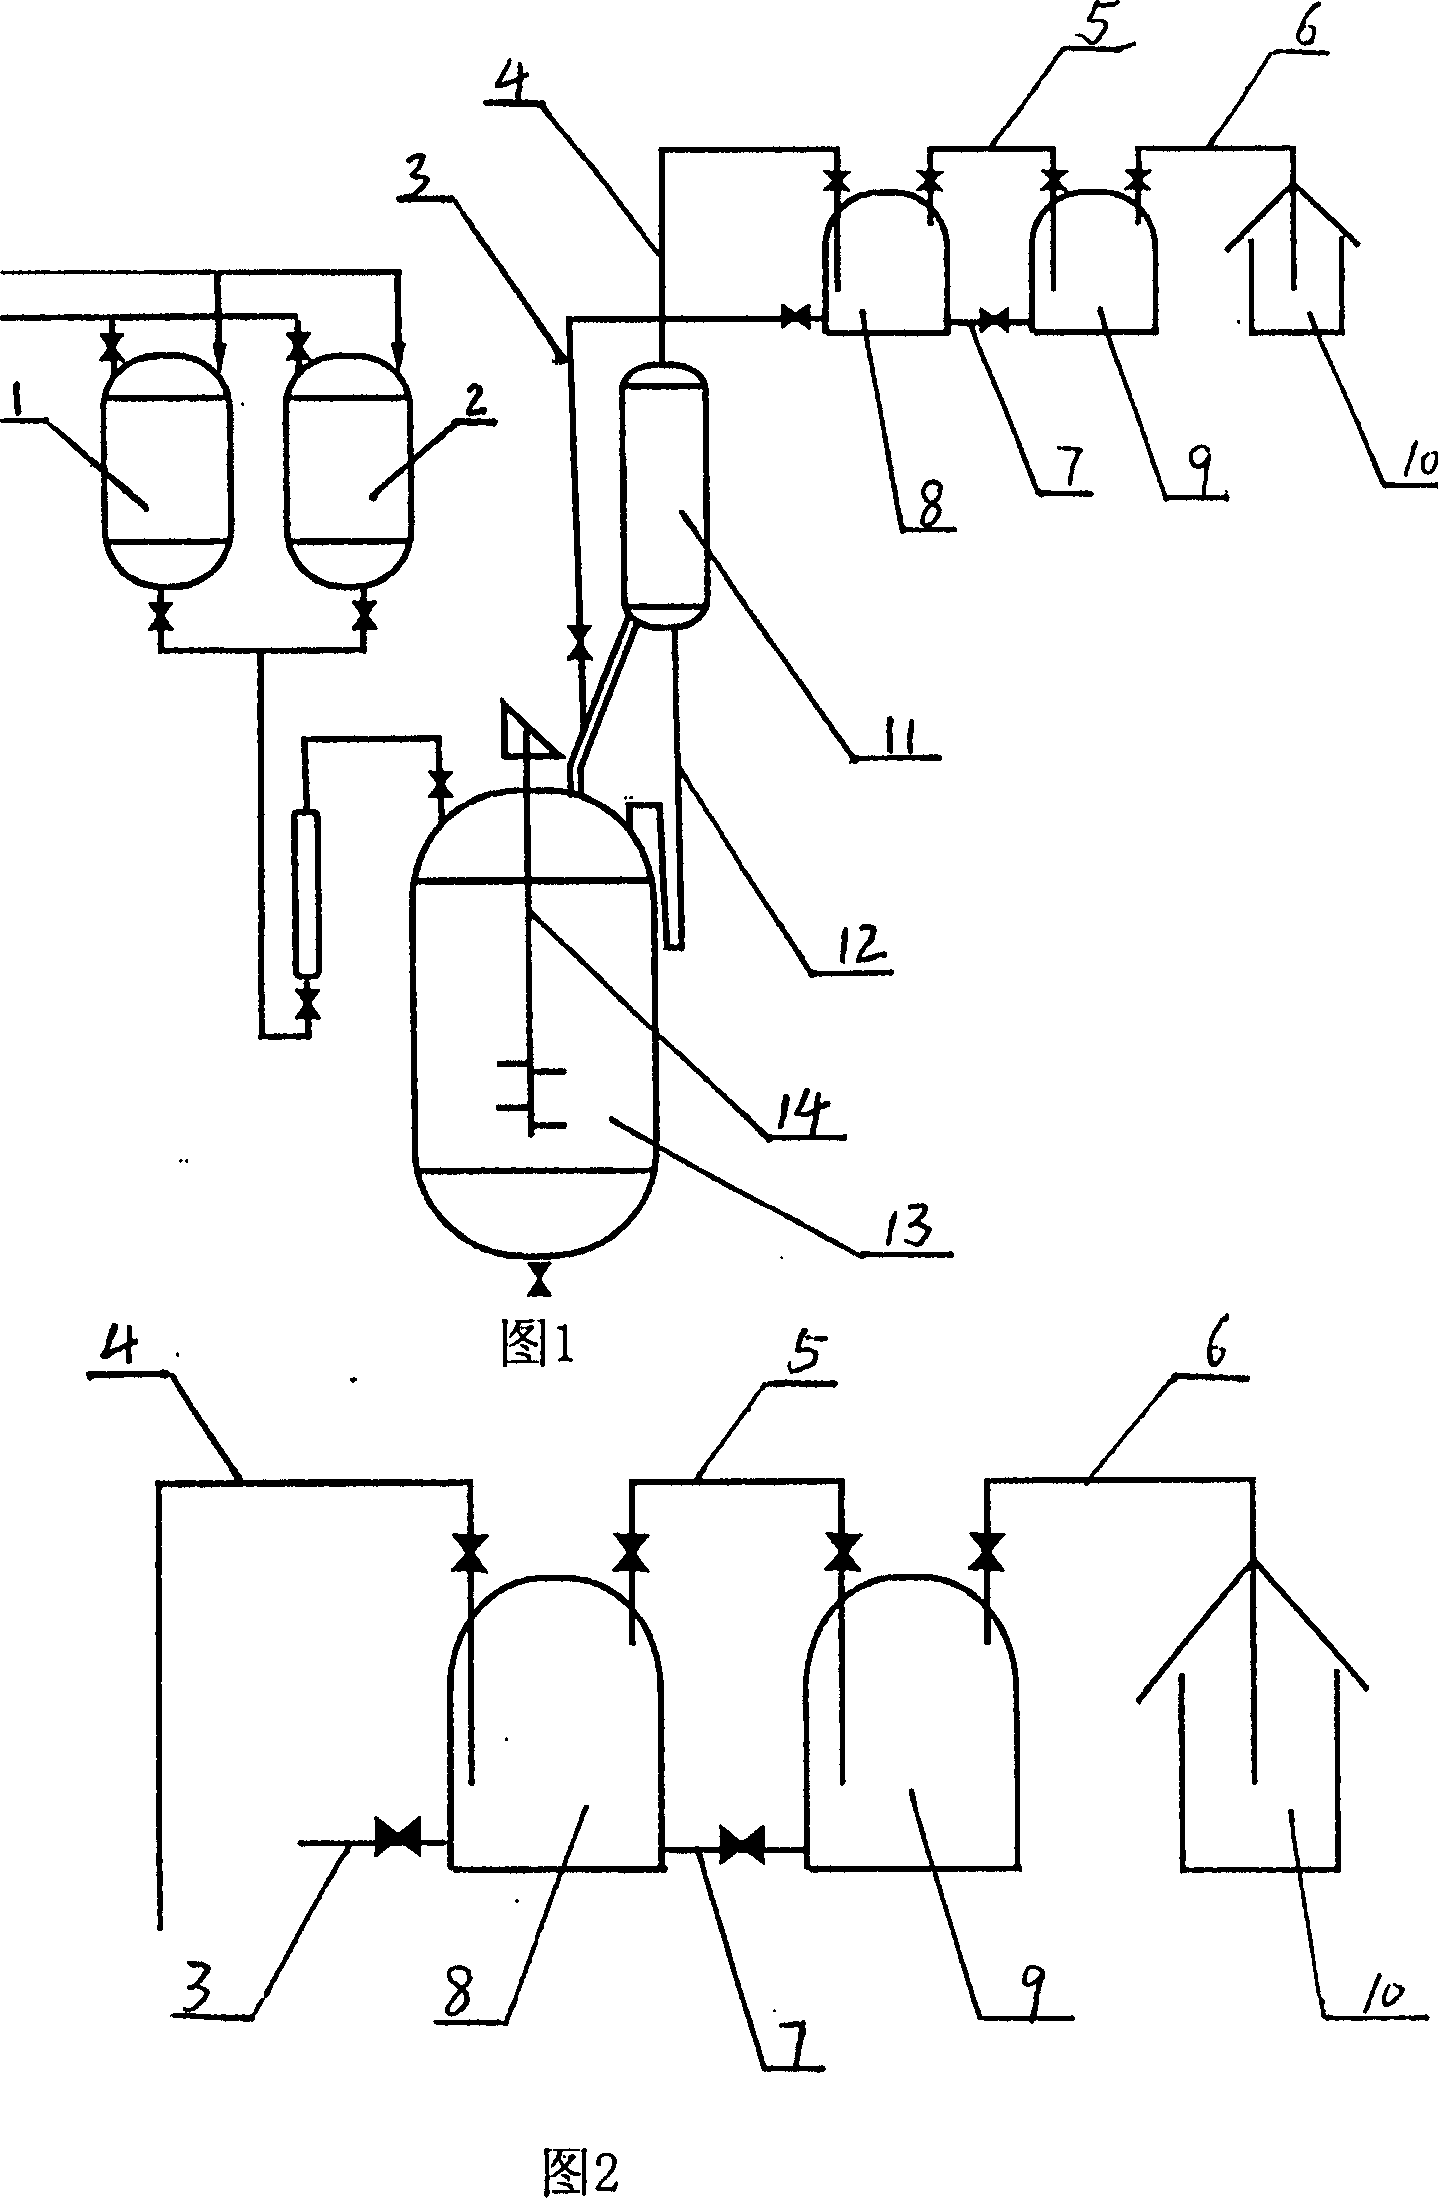 Preparation process and apparatus for alpha-acetyl-gamma-butyrolactone